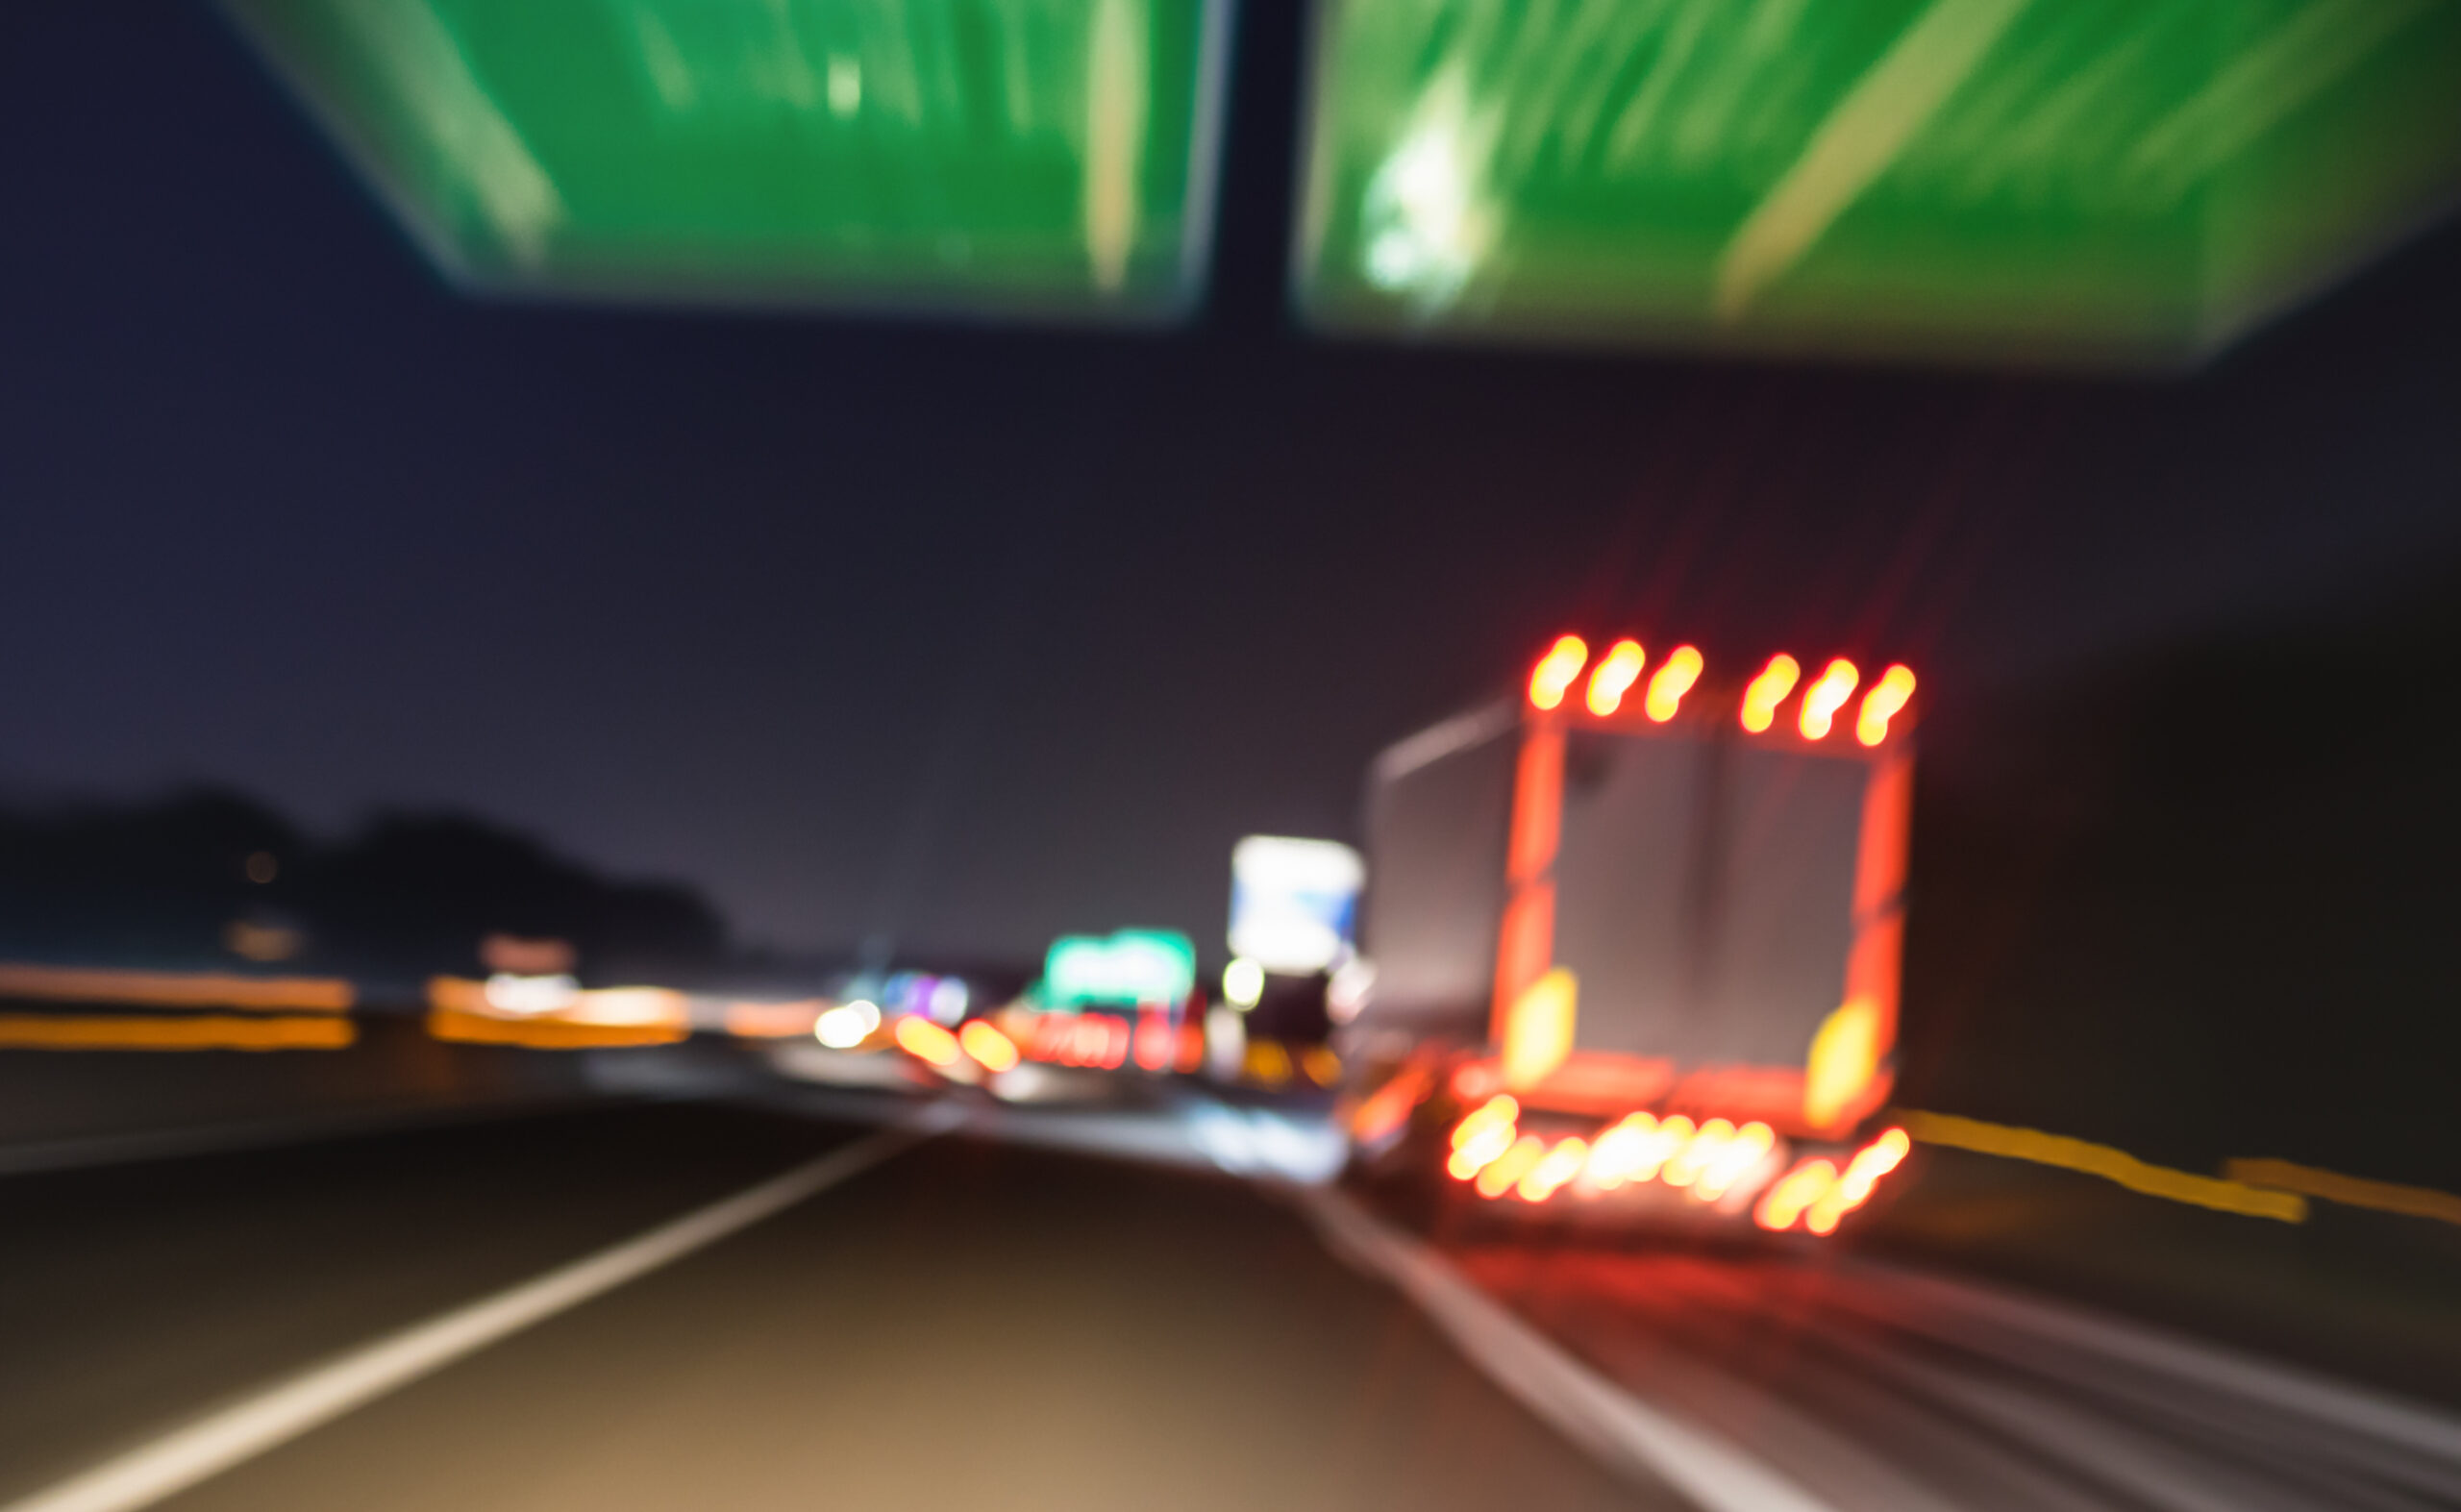 What to Do After a Truck Accident in South Carolina